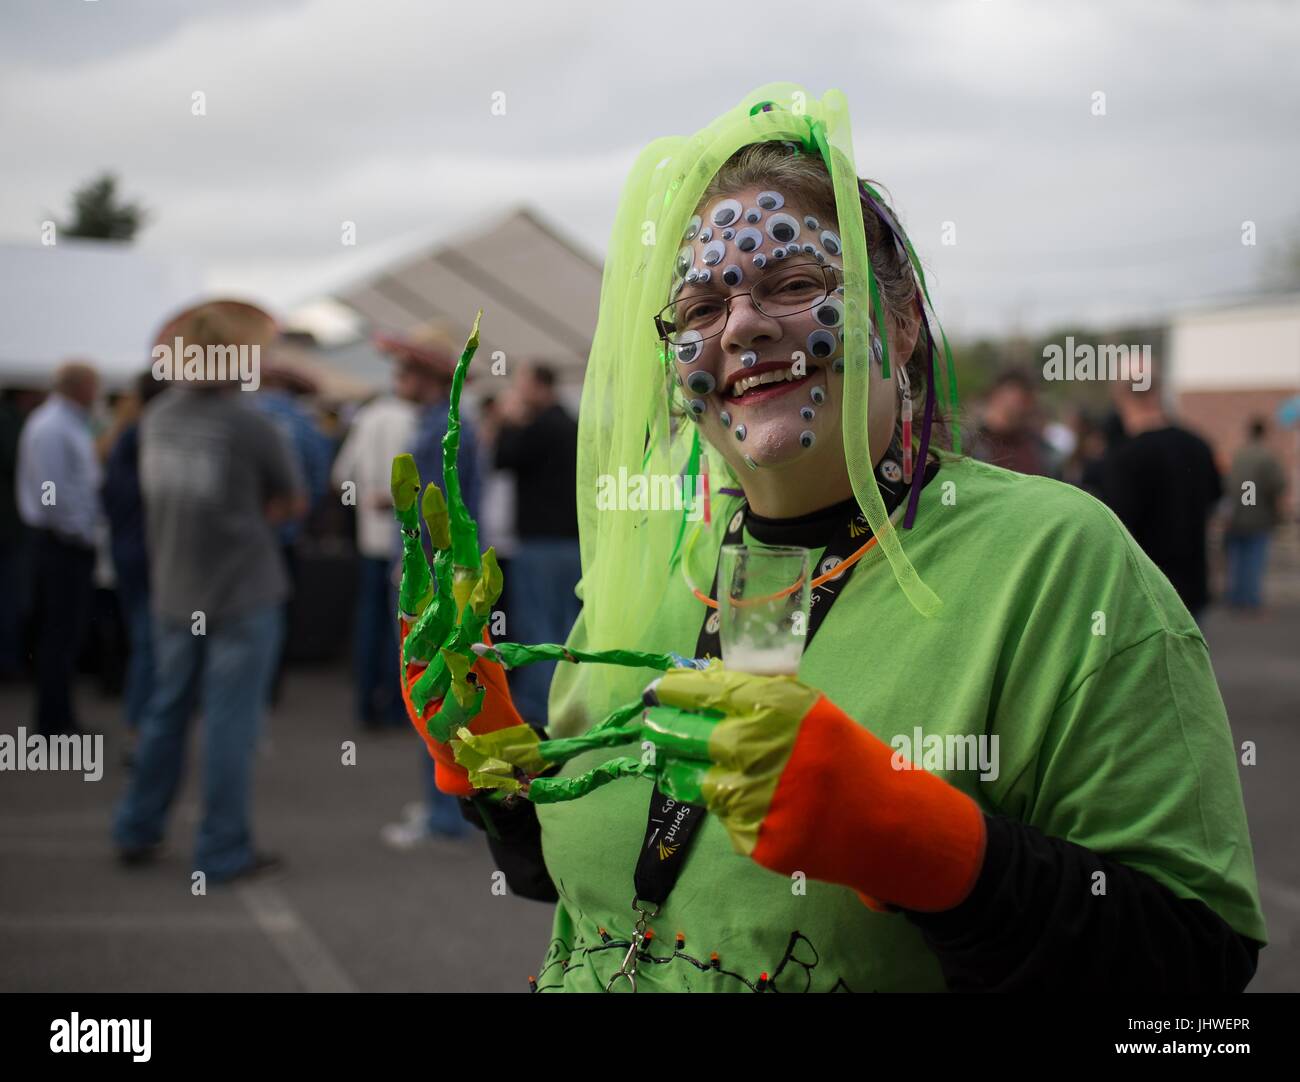 A local resident visits the Mars Brew before participating in an alien costume contest during the NASA Mars New Year celebration May 5, 2017 in Mars, Pennsylvania.     (photo by Bill Ingals via Planetpix) Stock Photo